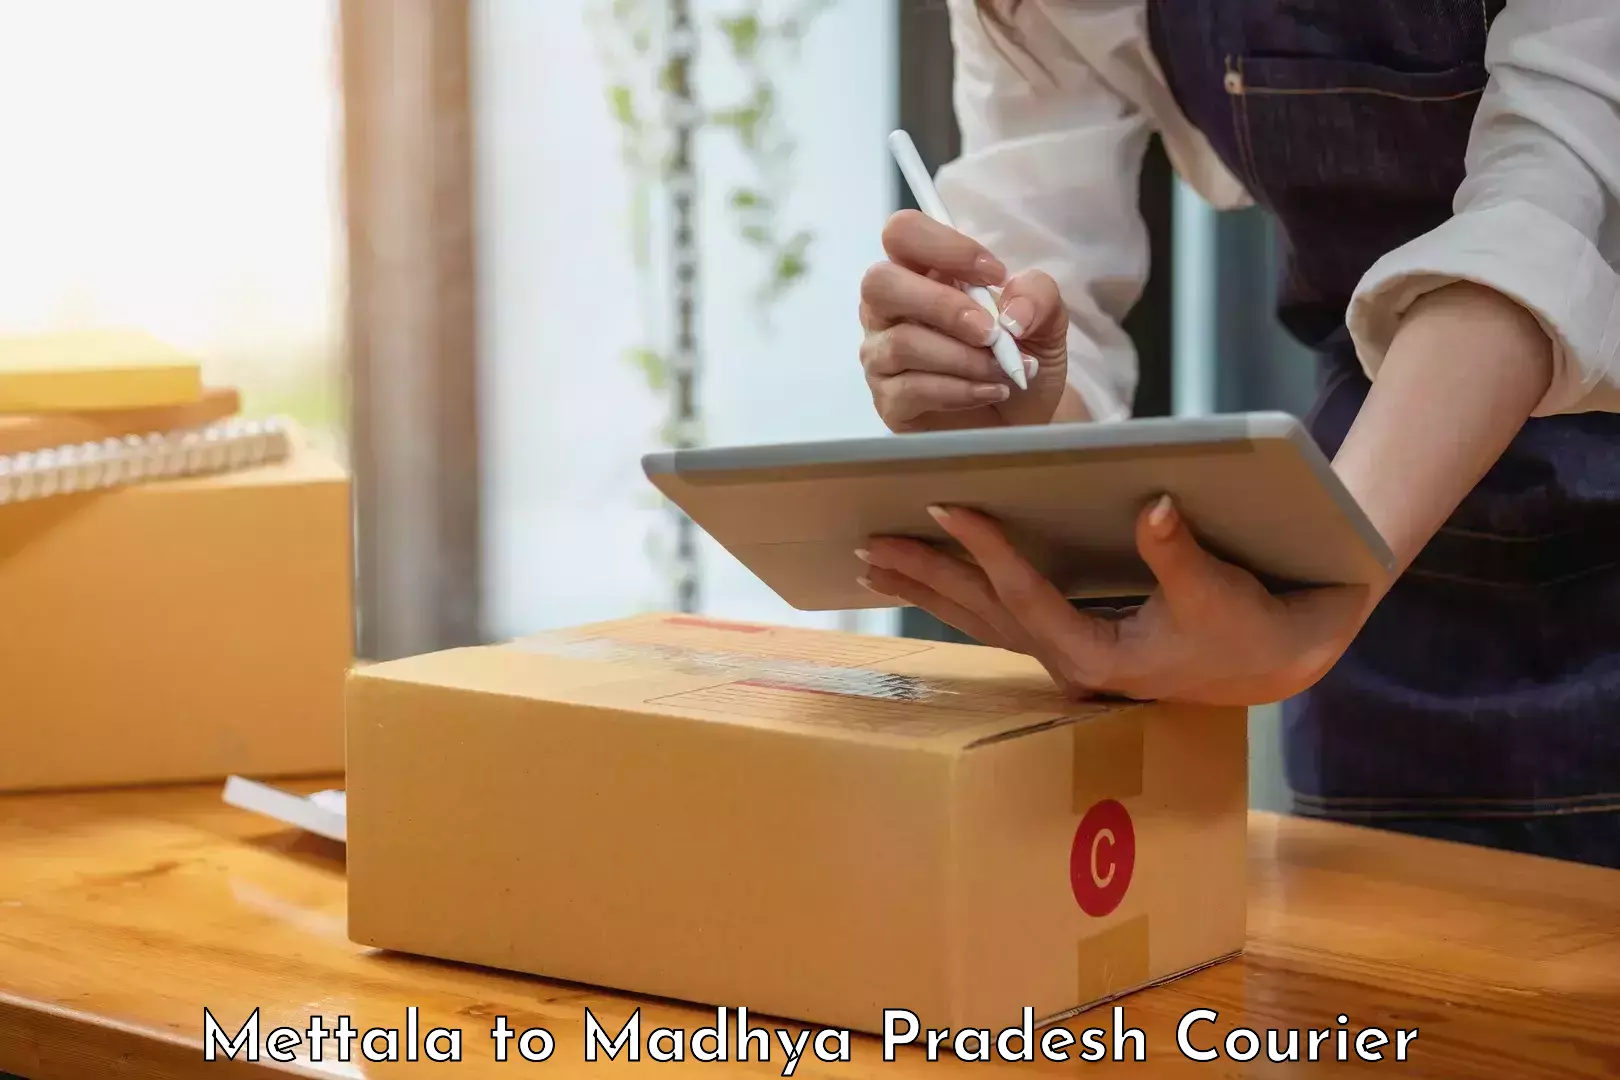 Fast delivery service Mettala to IIT Indore